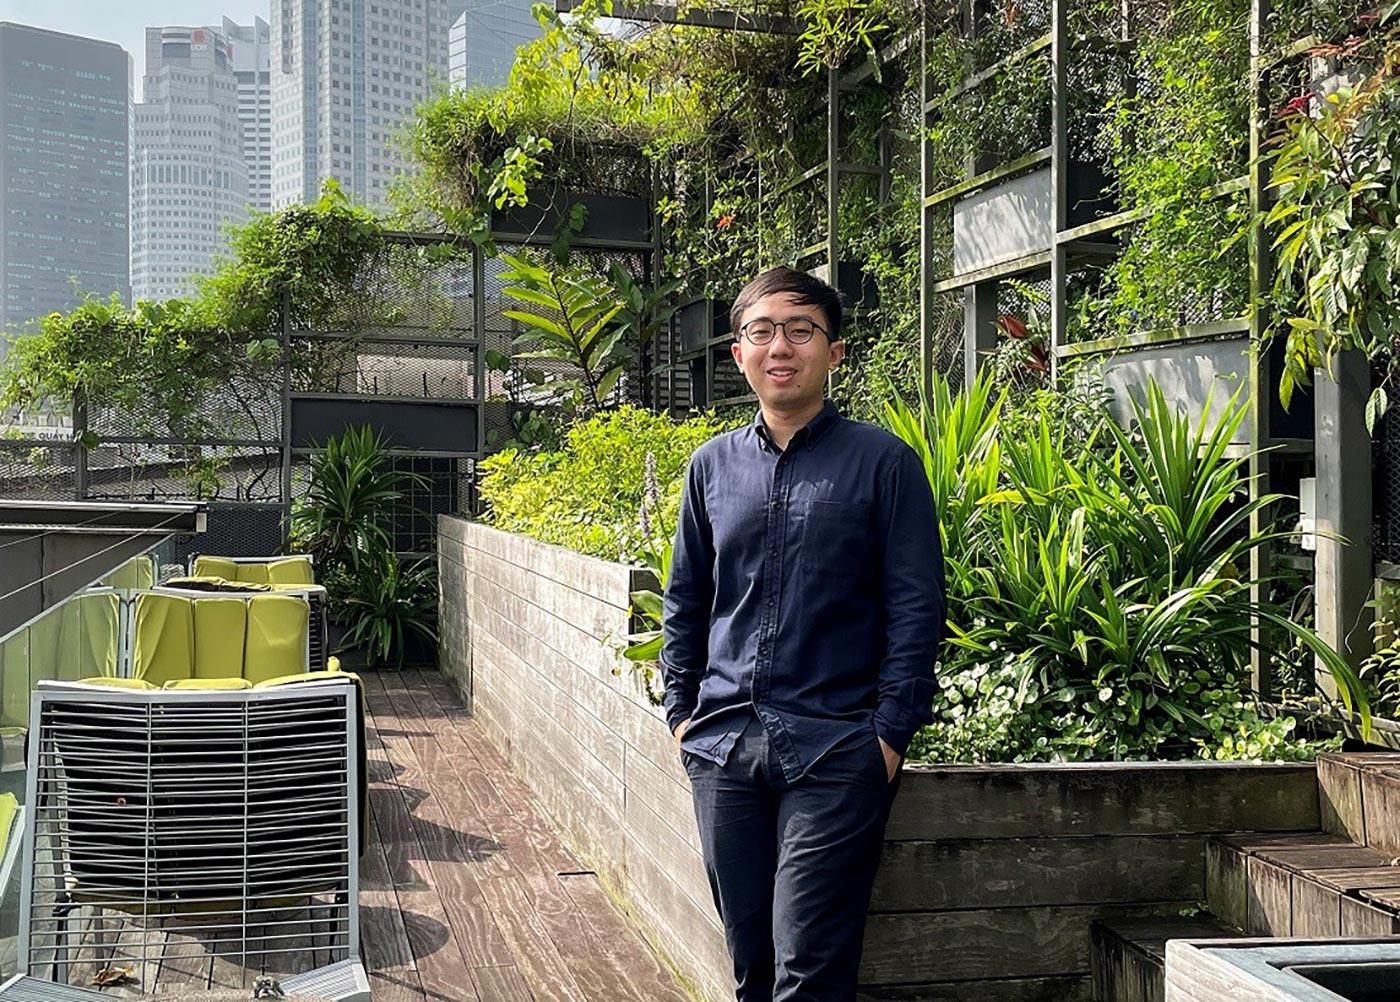 A Detour Cemented Dsg Scholar Jonathan Ng’s Love for Architecture